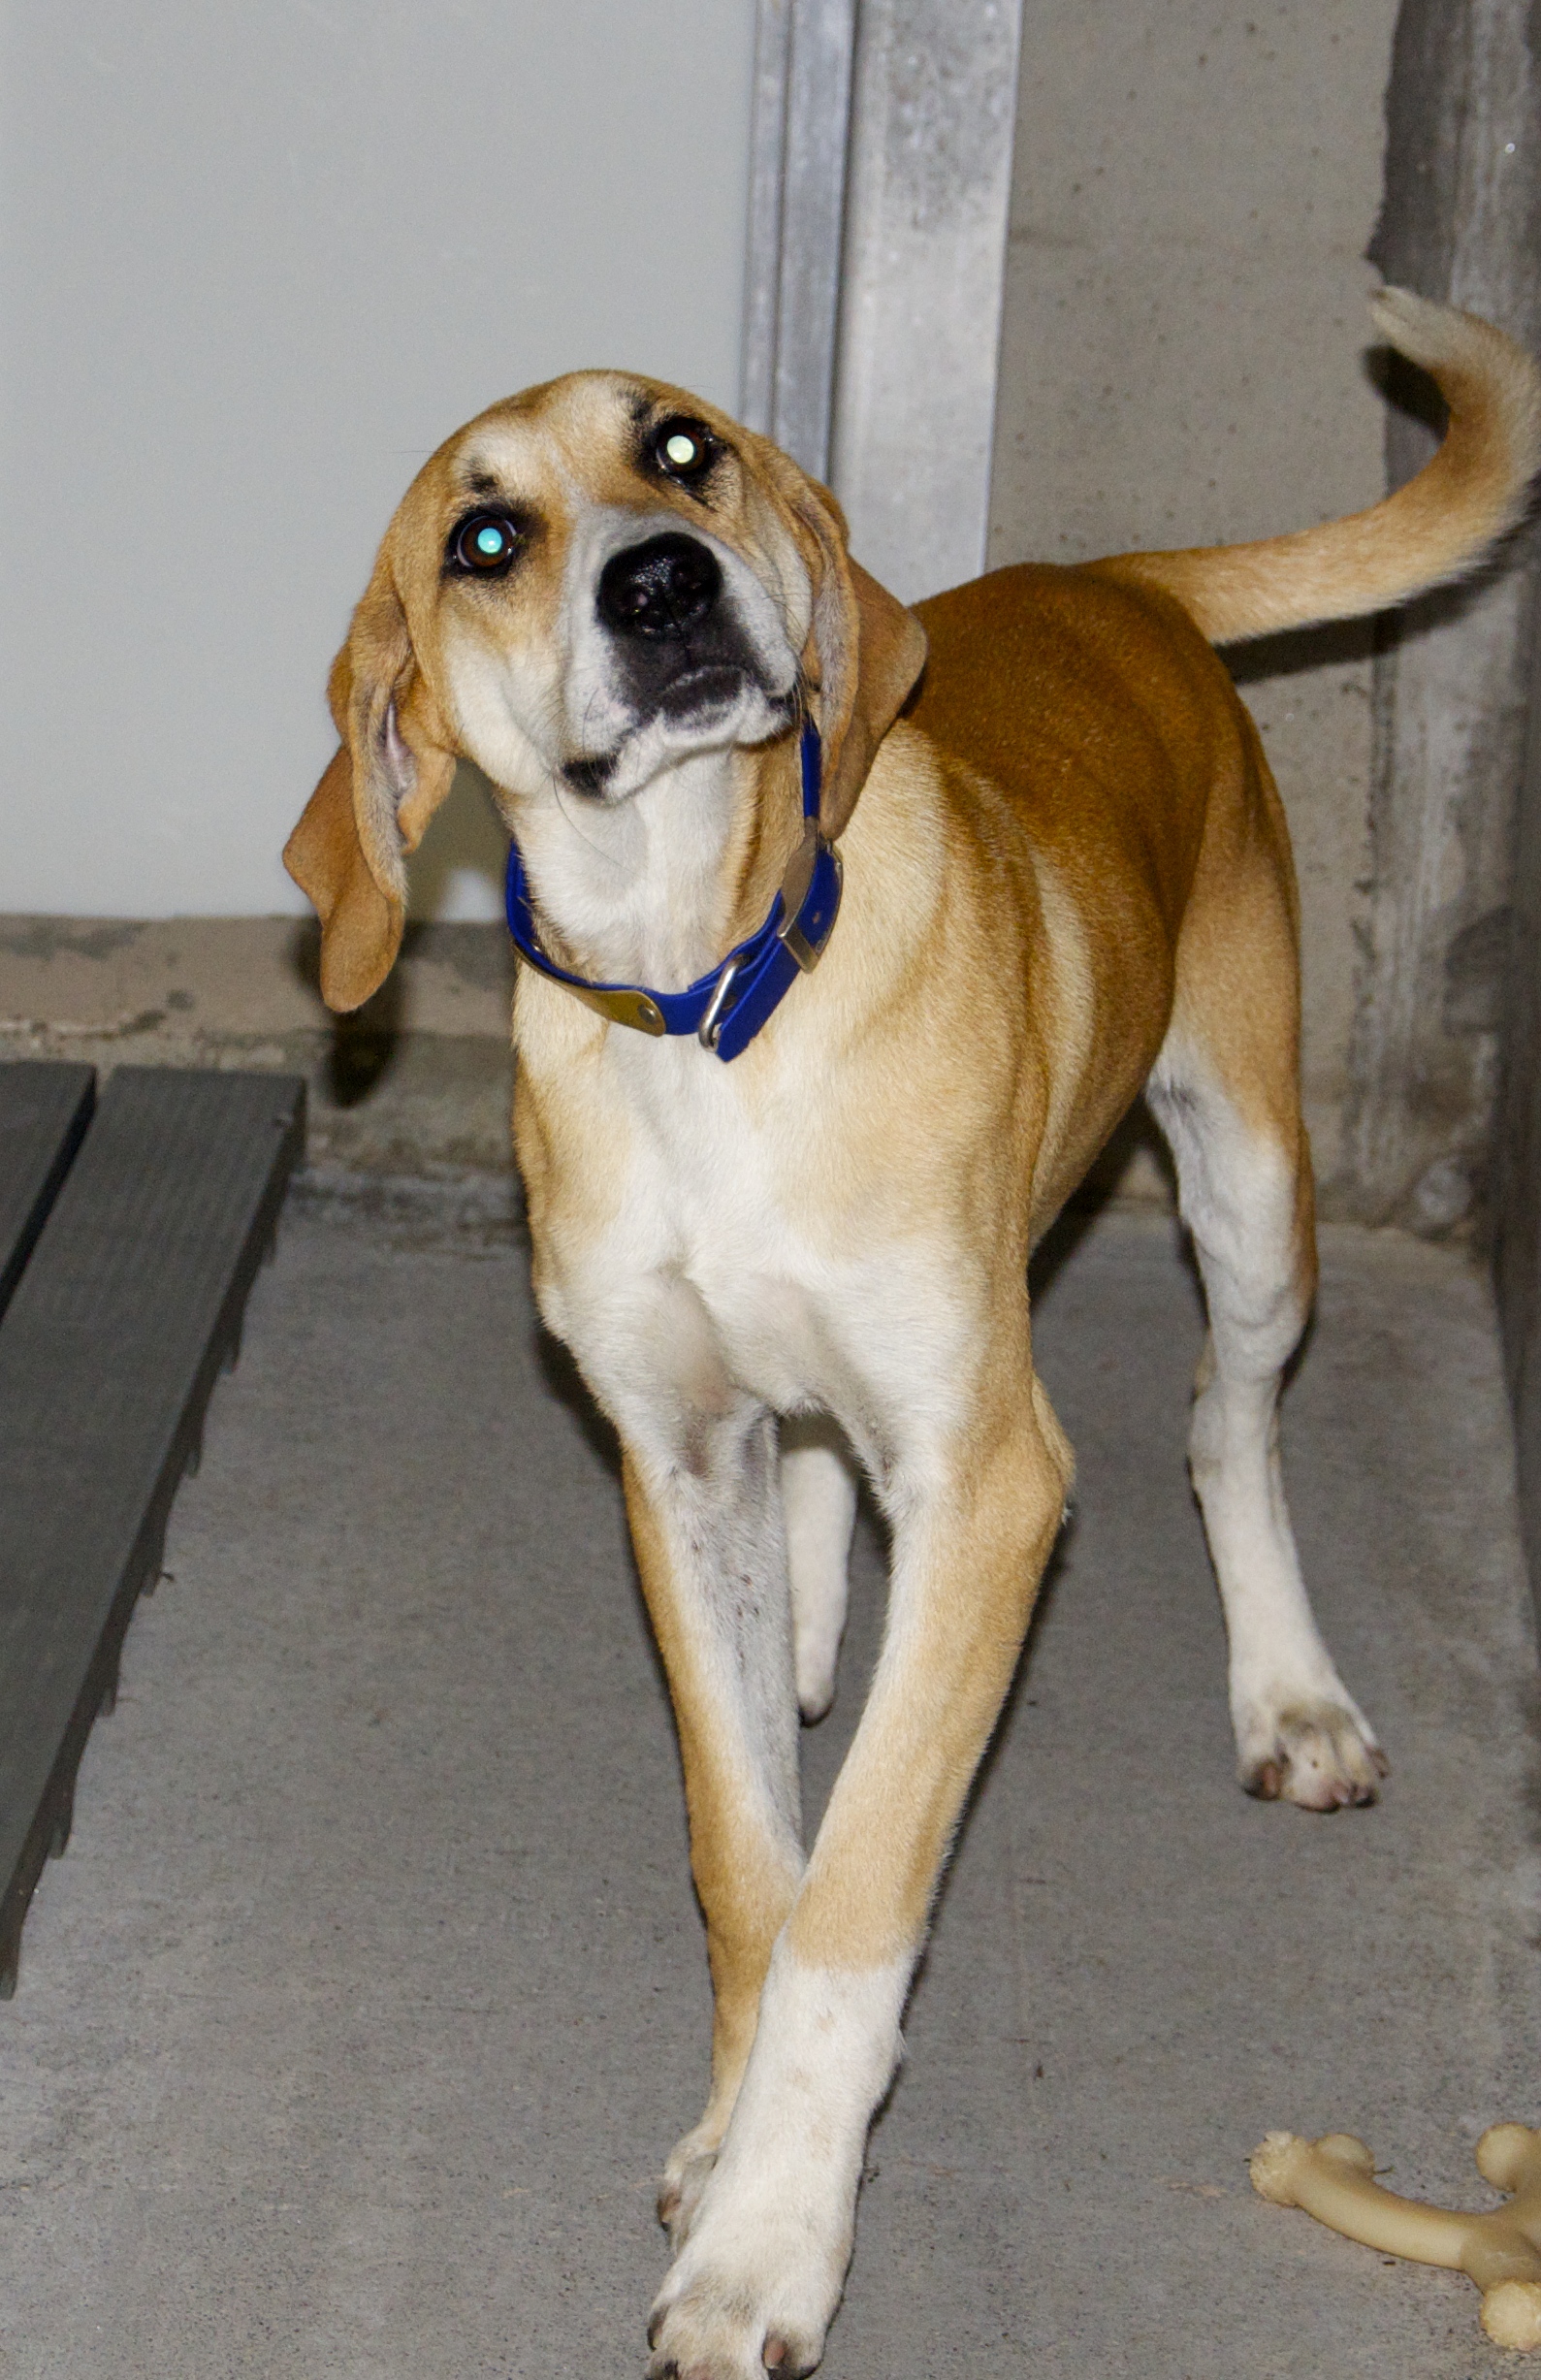 This male Hound was dropped off at animal control October 14. He has a blonde and white coat. View this sweetie using intake number 253-21.